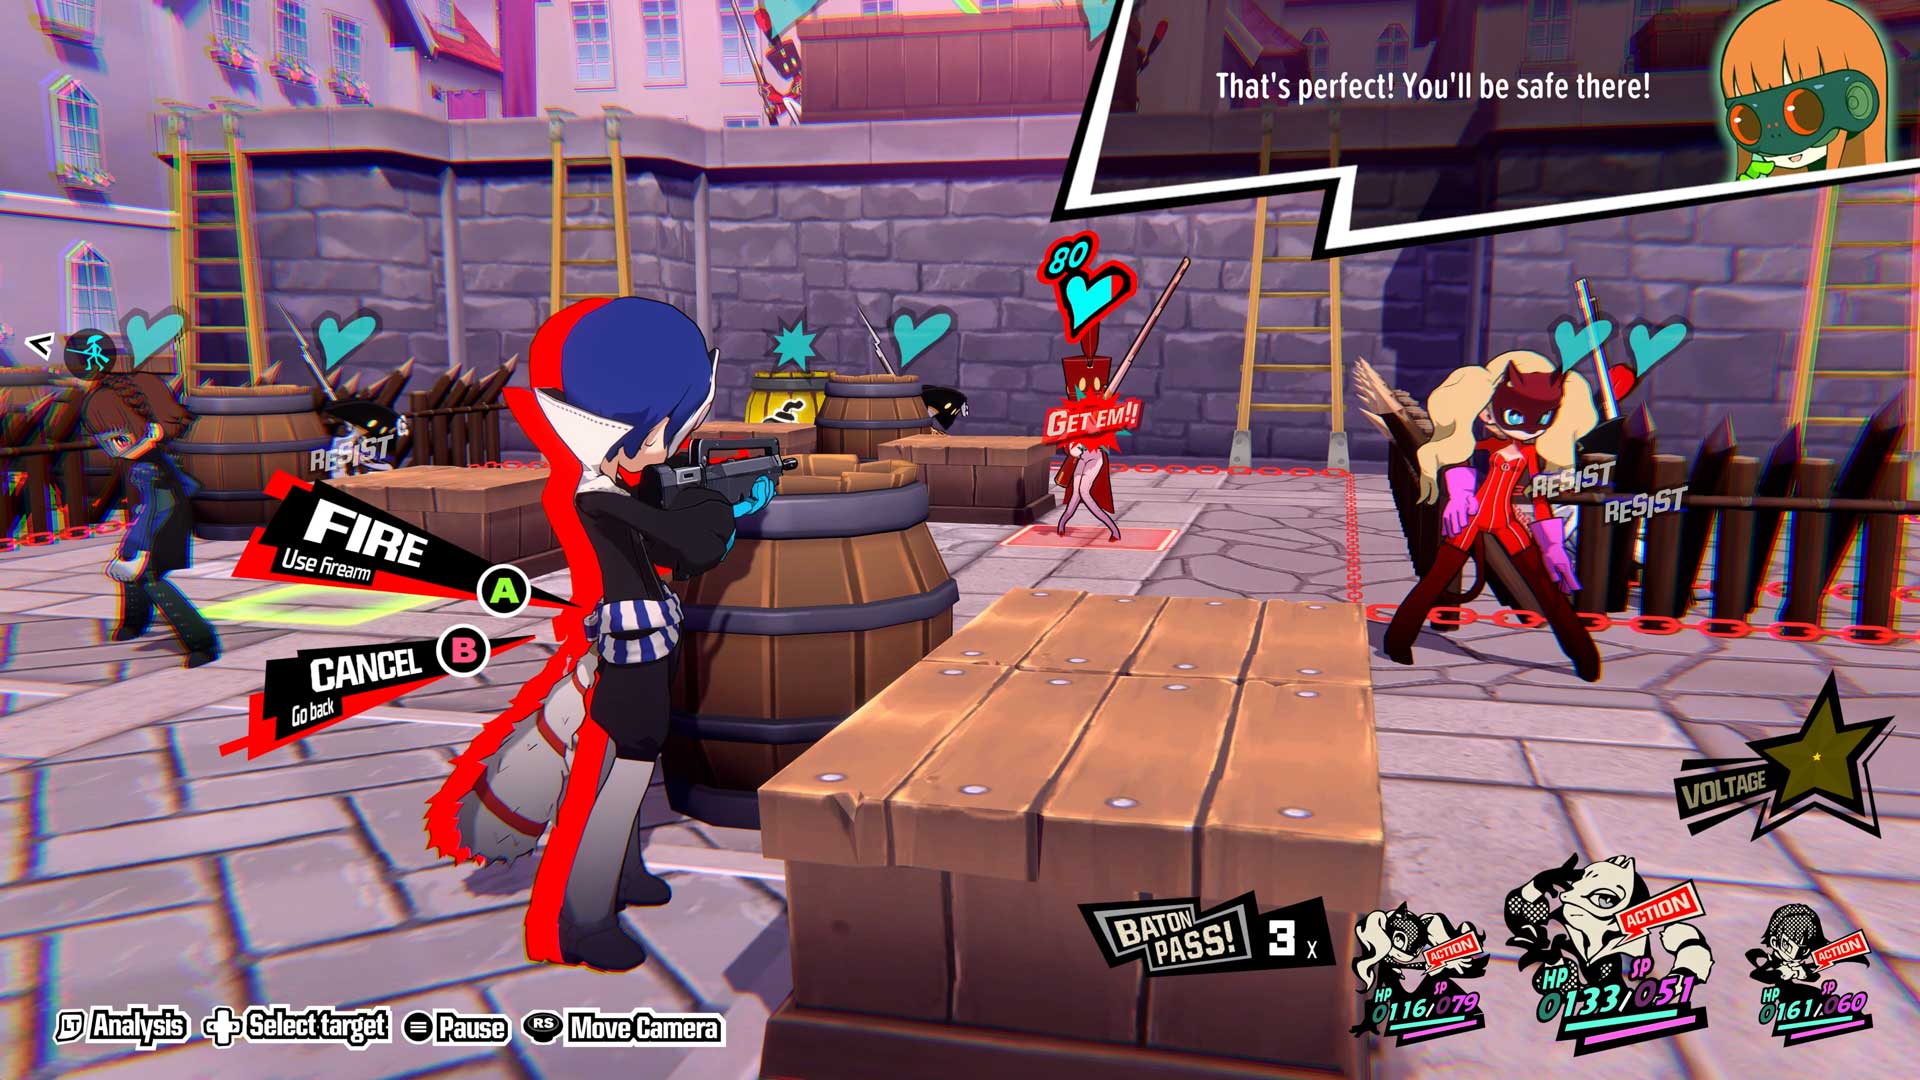 Official ATLUS West on X: Play through Persona 5 Tactica equipped with  gear fit for a Phantom Thief with the Rebel's Resolve Sweepstakes! 🚩 Ten  lucky US-based winners will receive an exclusive